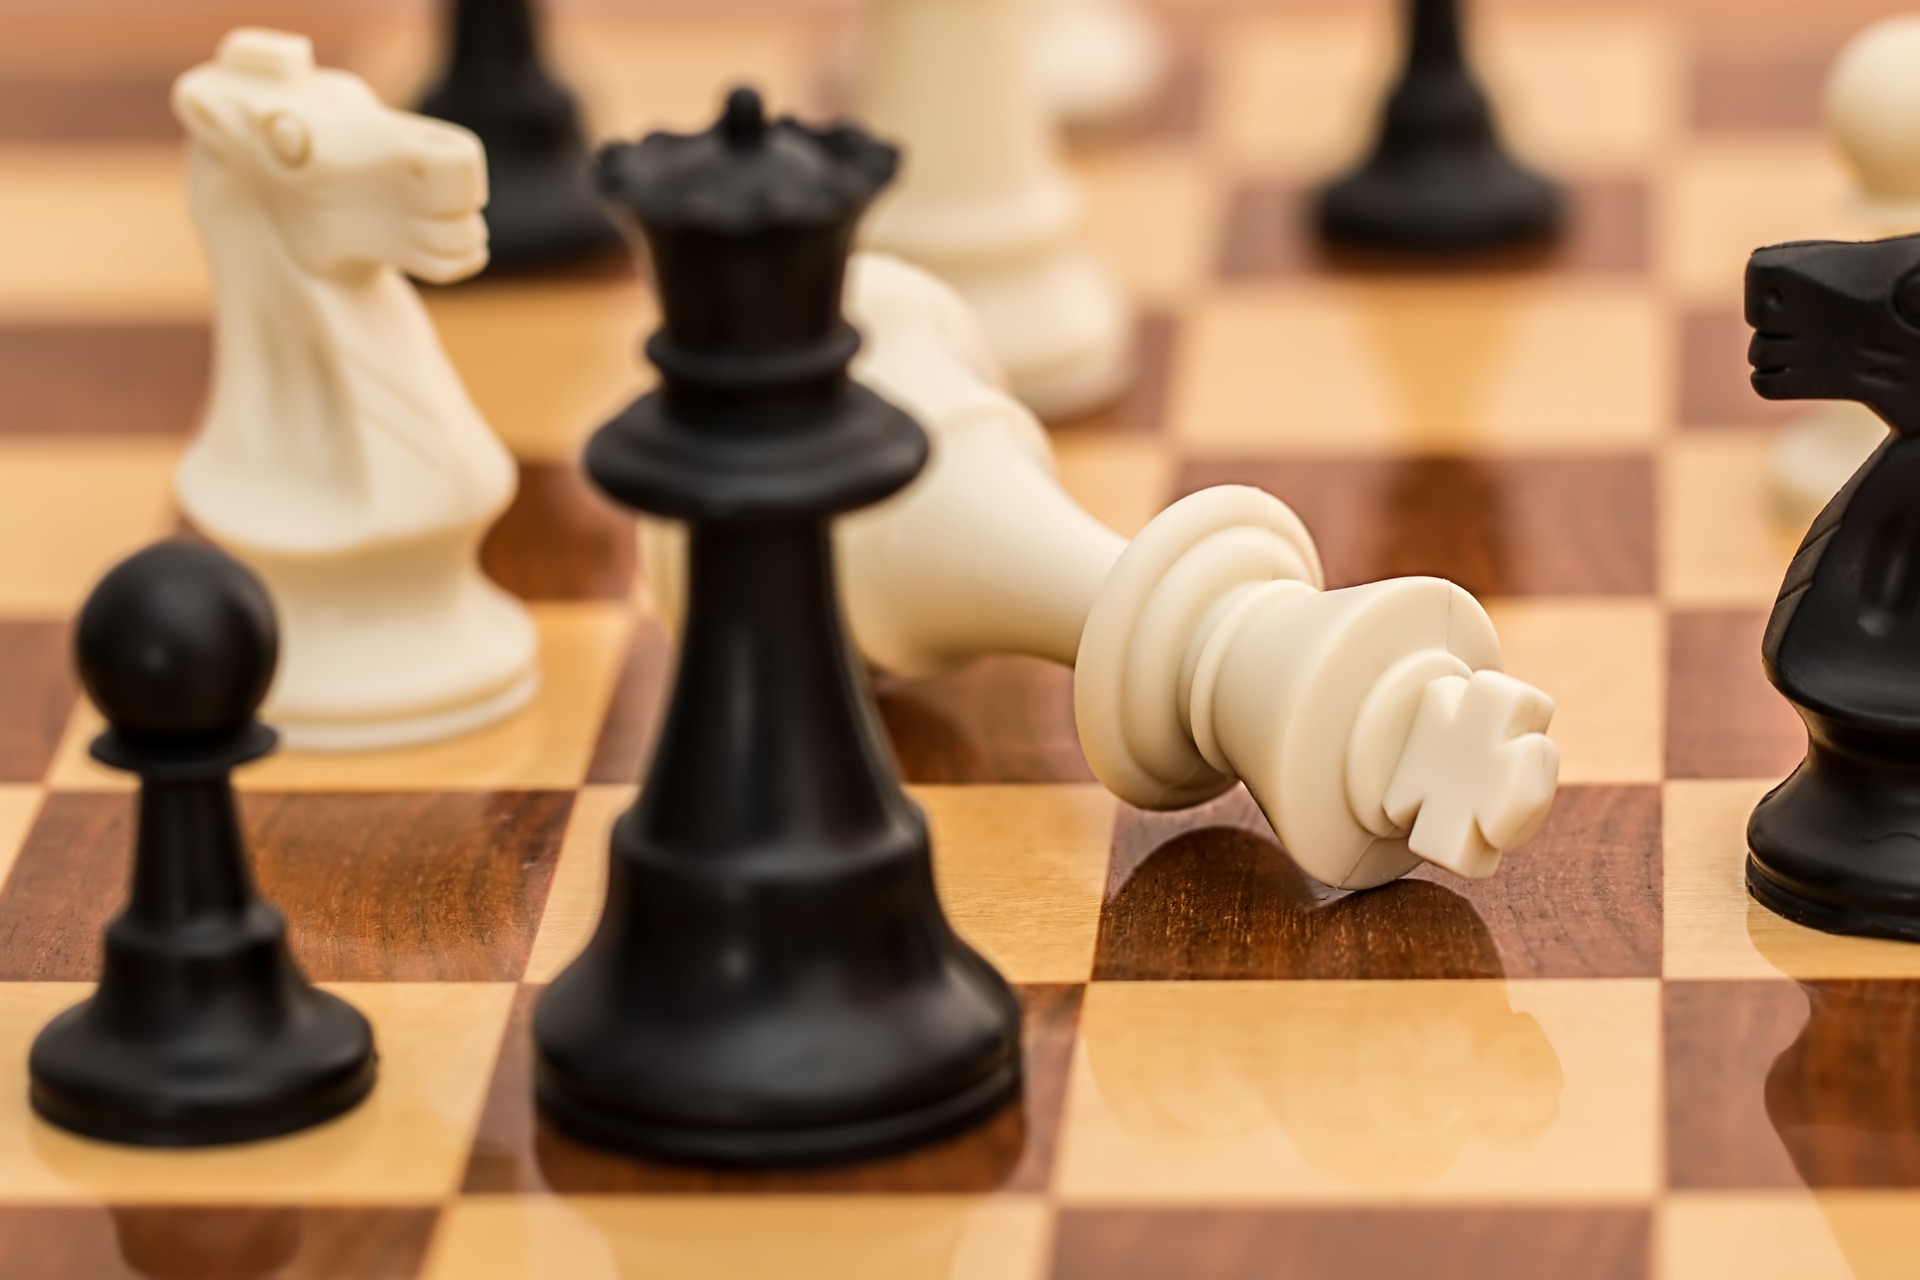 A white chessman falls on the chessboard.